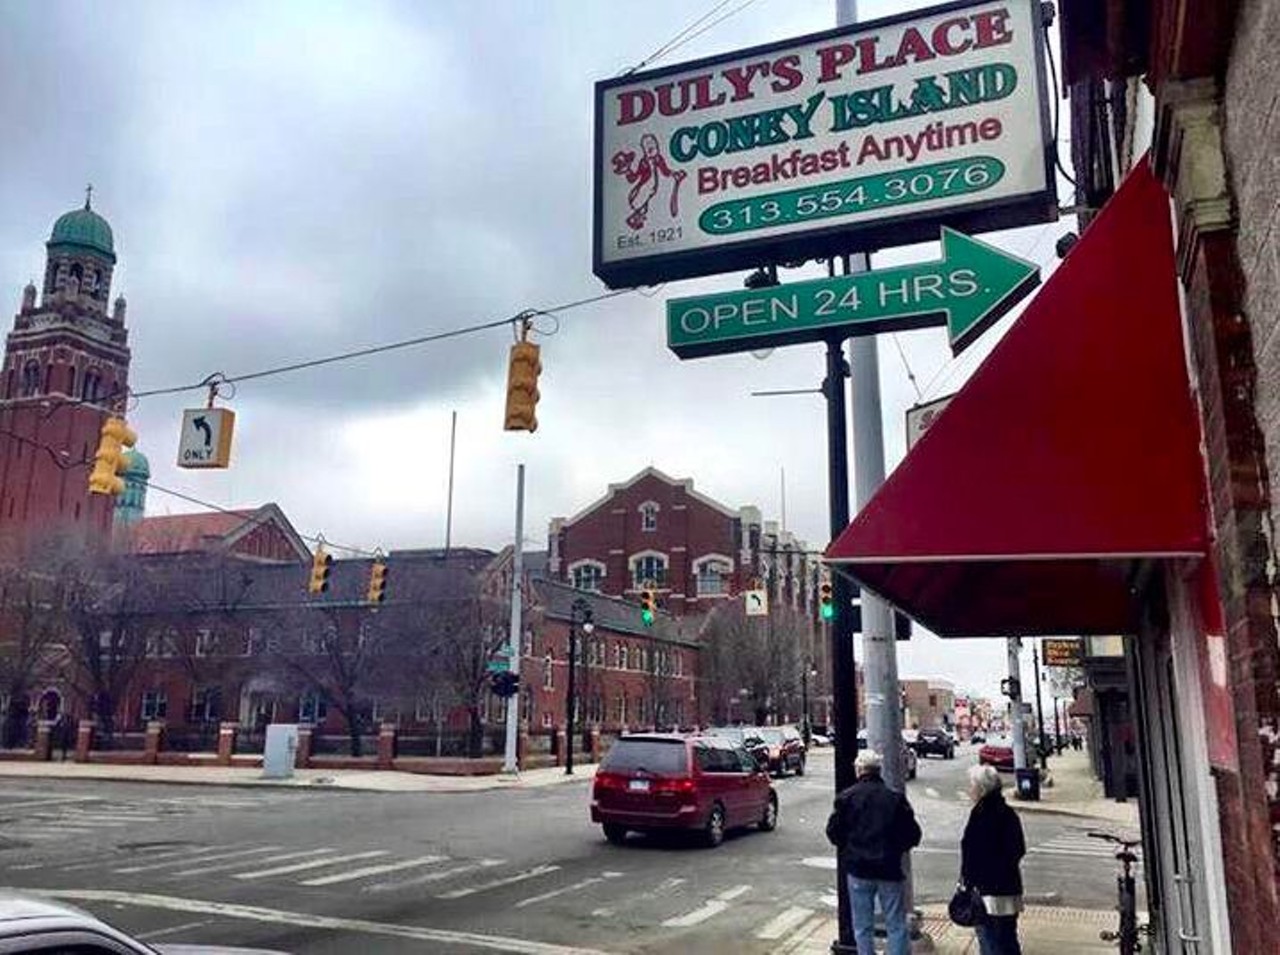 Duly&#146;s Place Coney Island
5458 W. Vernor Hwy., Detroit; 313-554-3076
This historic 24-hour diner serves affordable, high-quality food. Esteemed food critic Anthony Bourdain once ate here, grabbing a classic hot dog with chili, onion, and mustard.
Photo via Duly&#146;s Place / Facebook